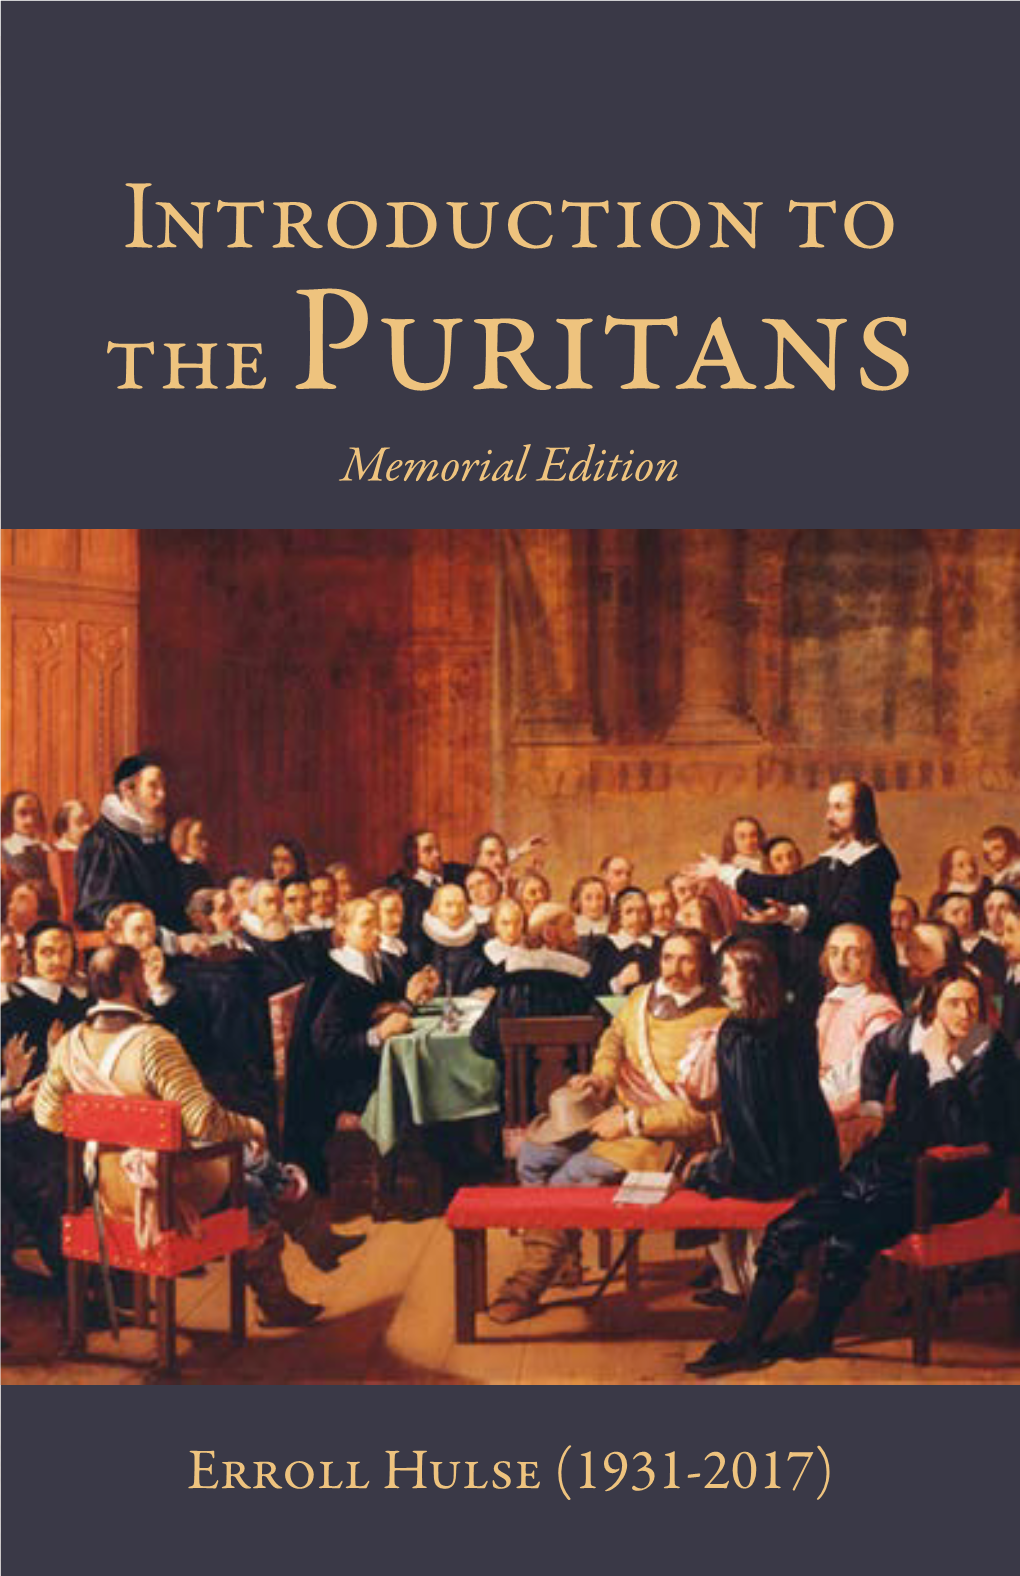 Introduction to the Puritans: Memorial Edition